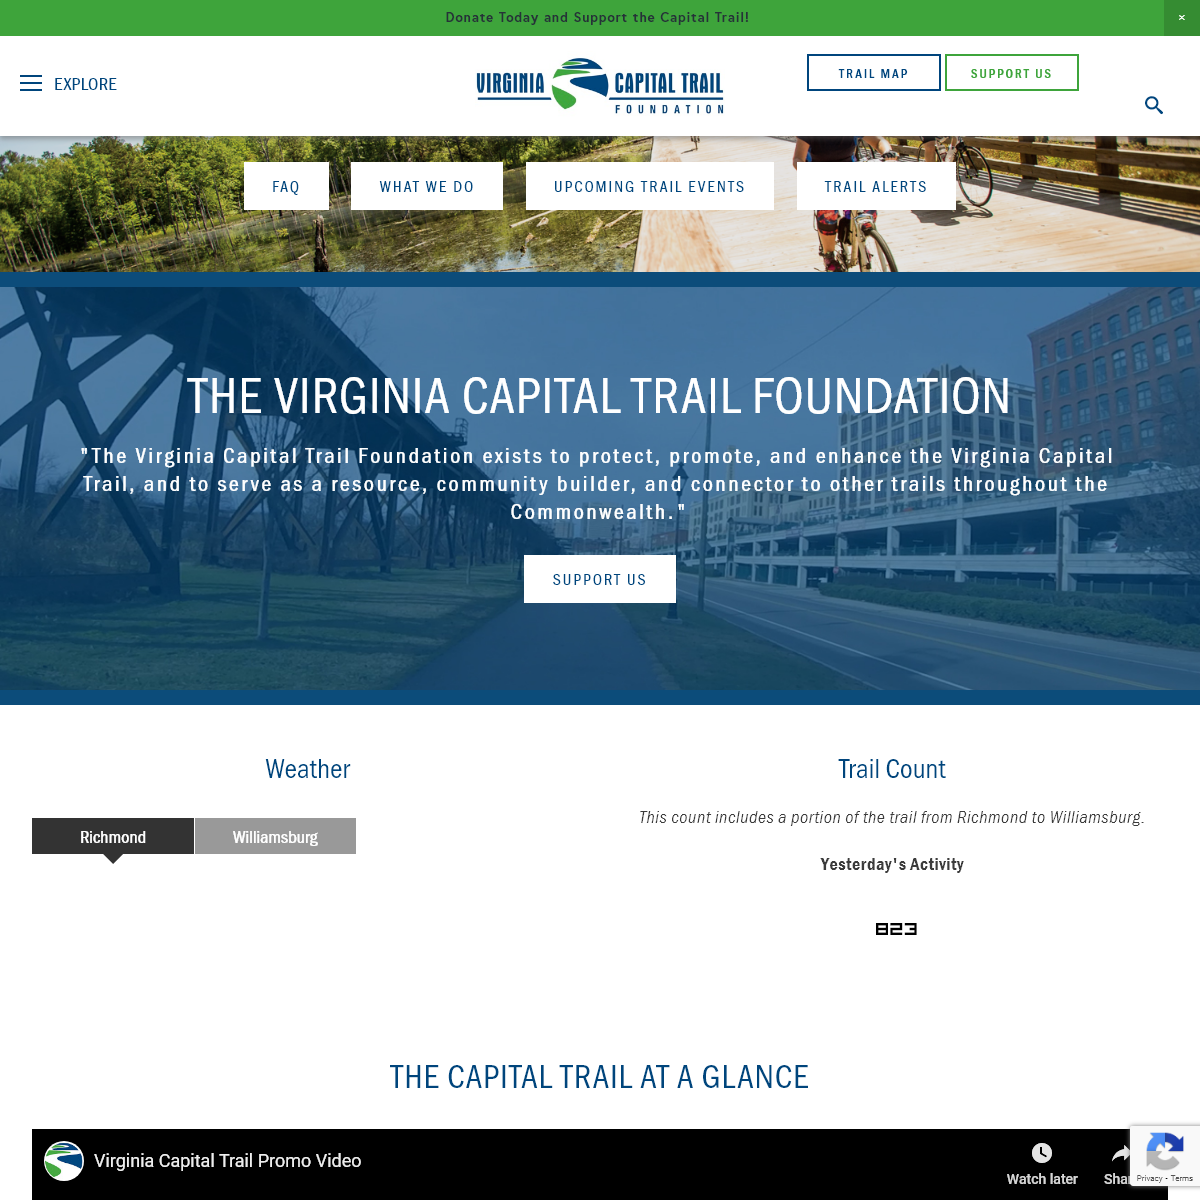 A complete backup of virginiacapitaltrail.org